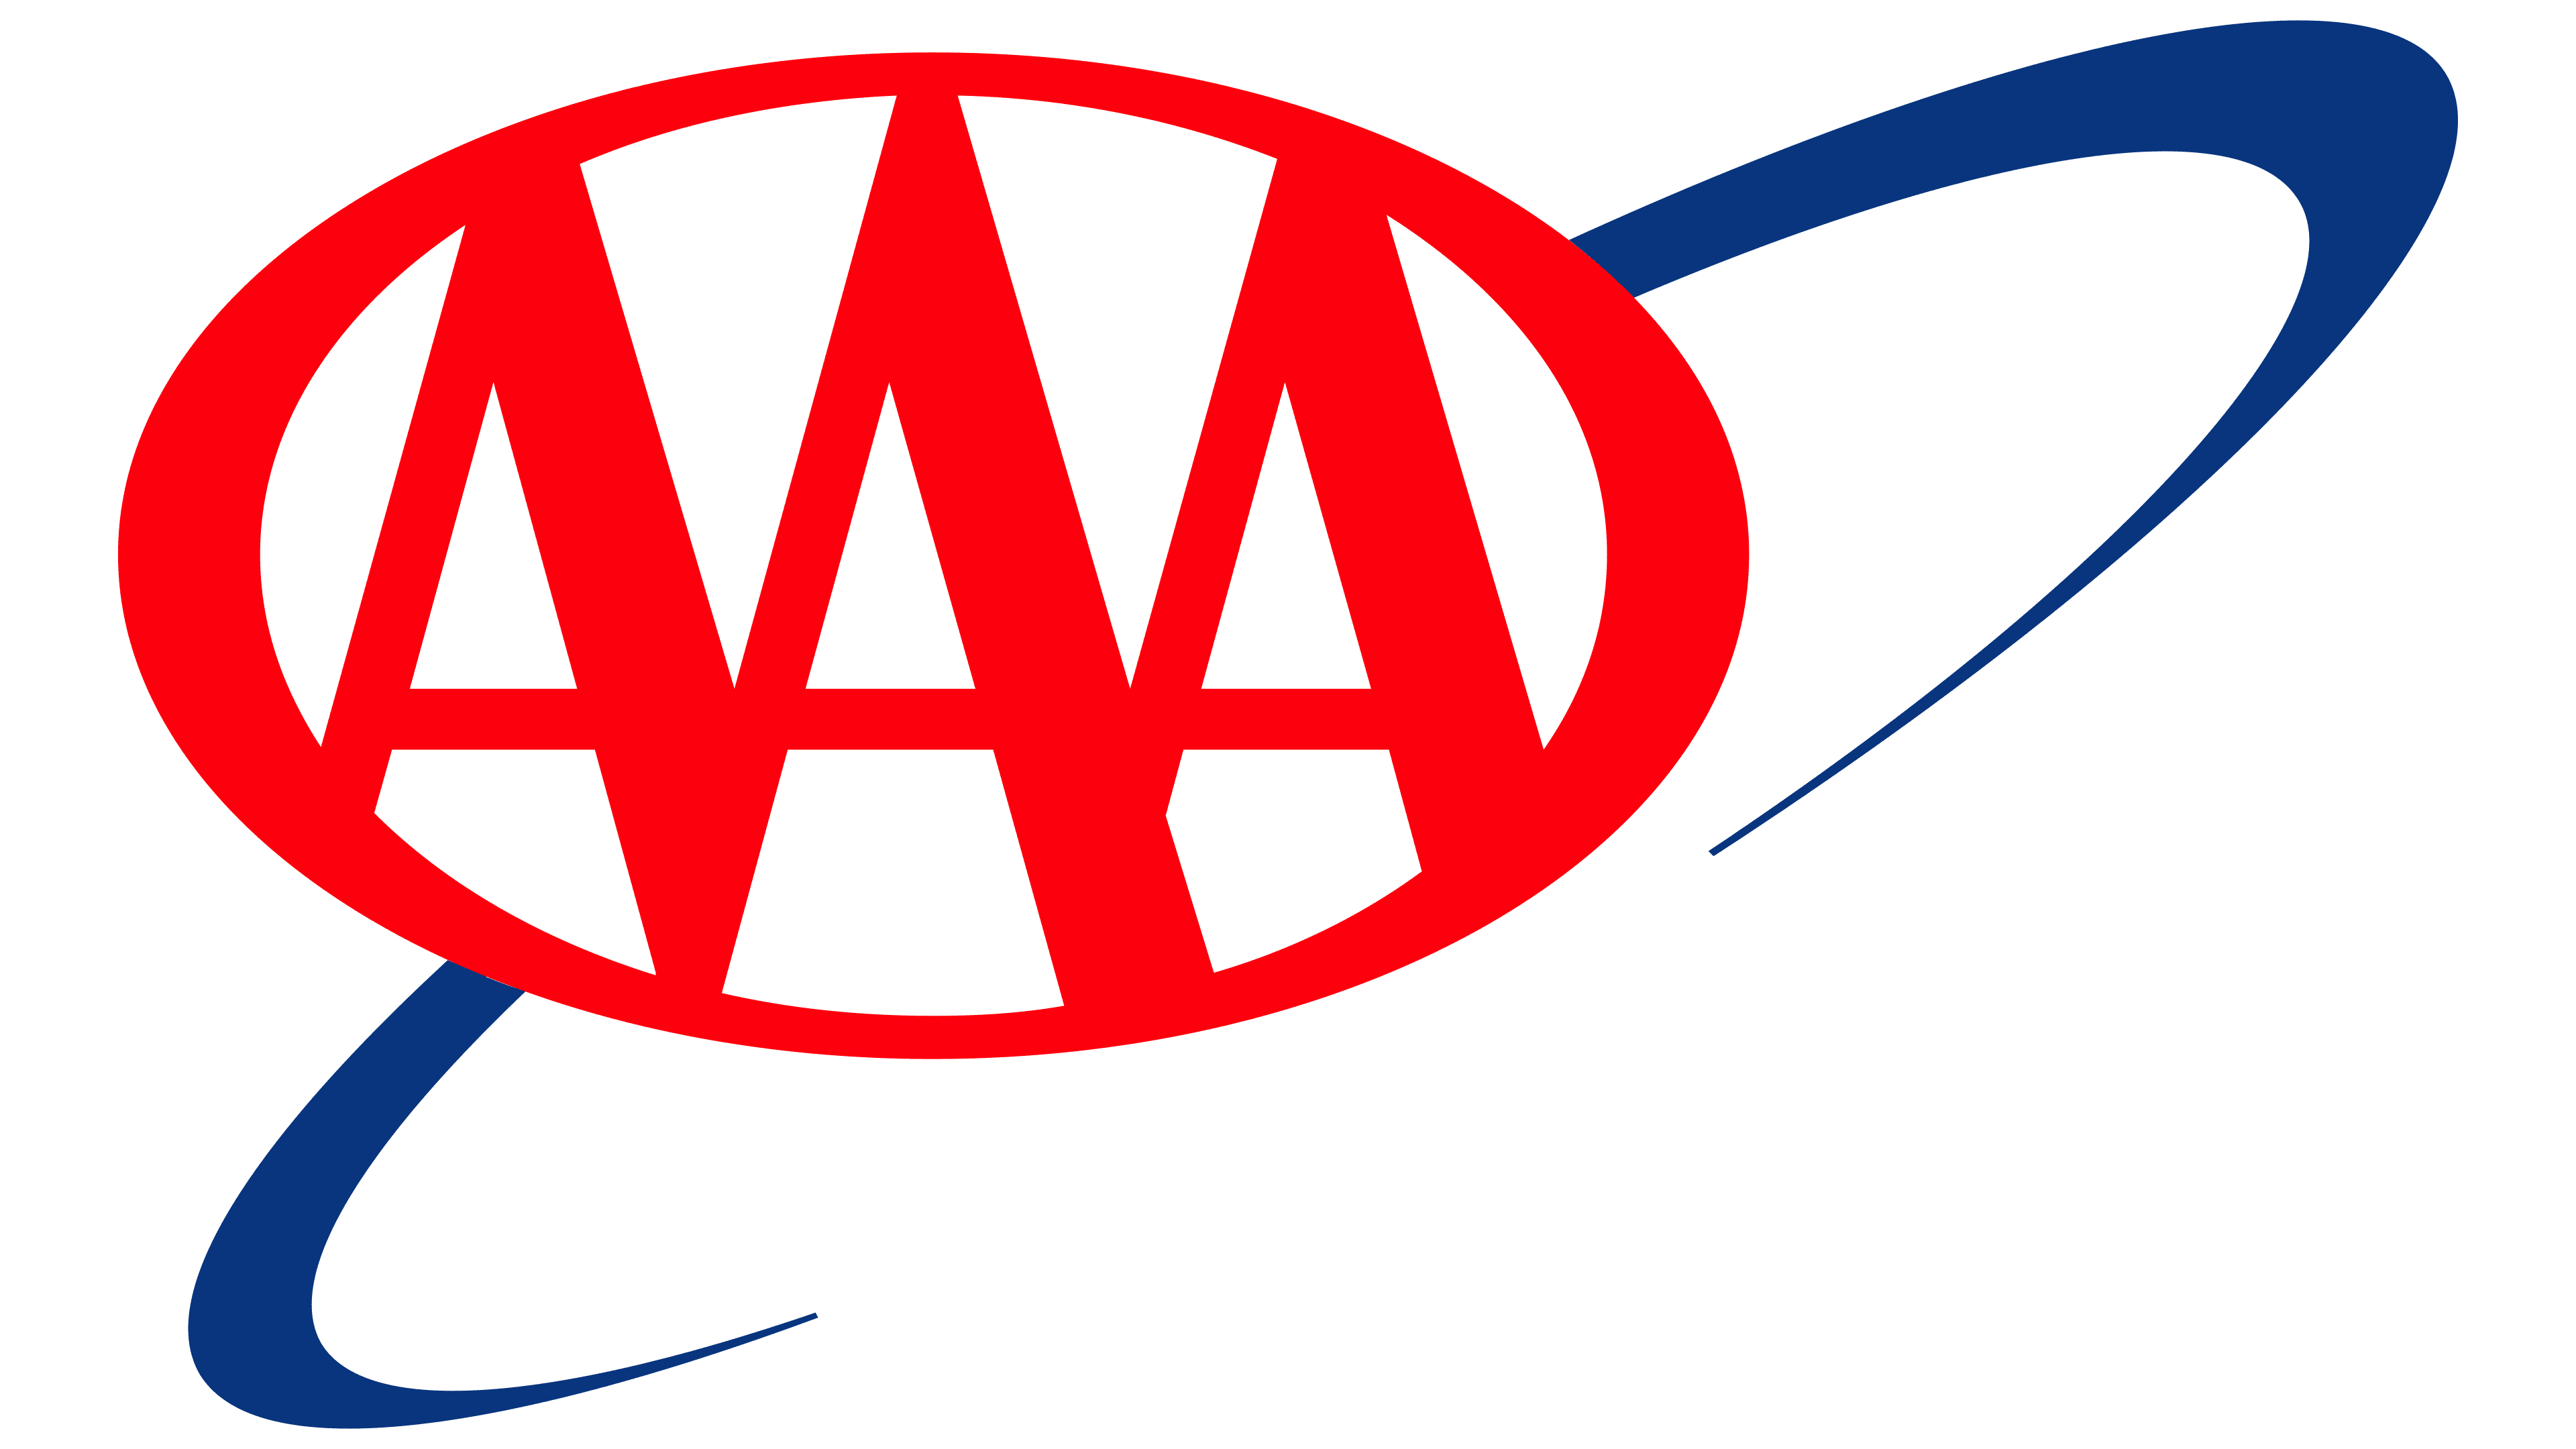 AAA Insurance: Trusted Coverage and Membership Benefits for Your Peace of Mind